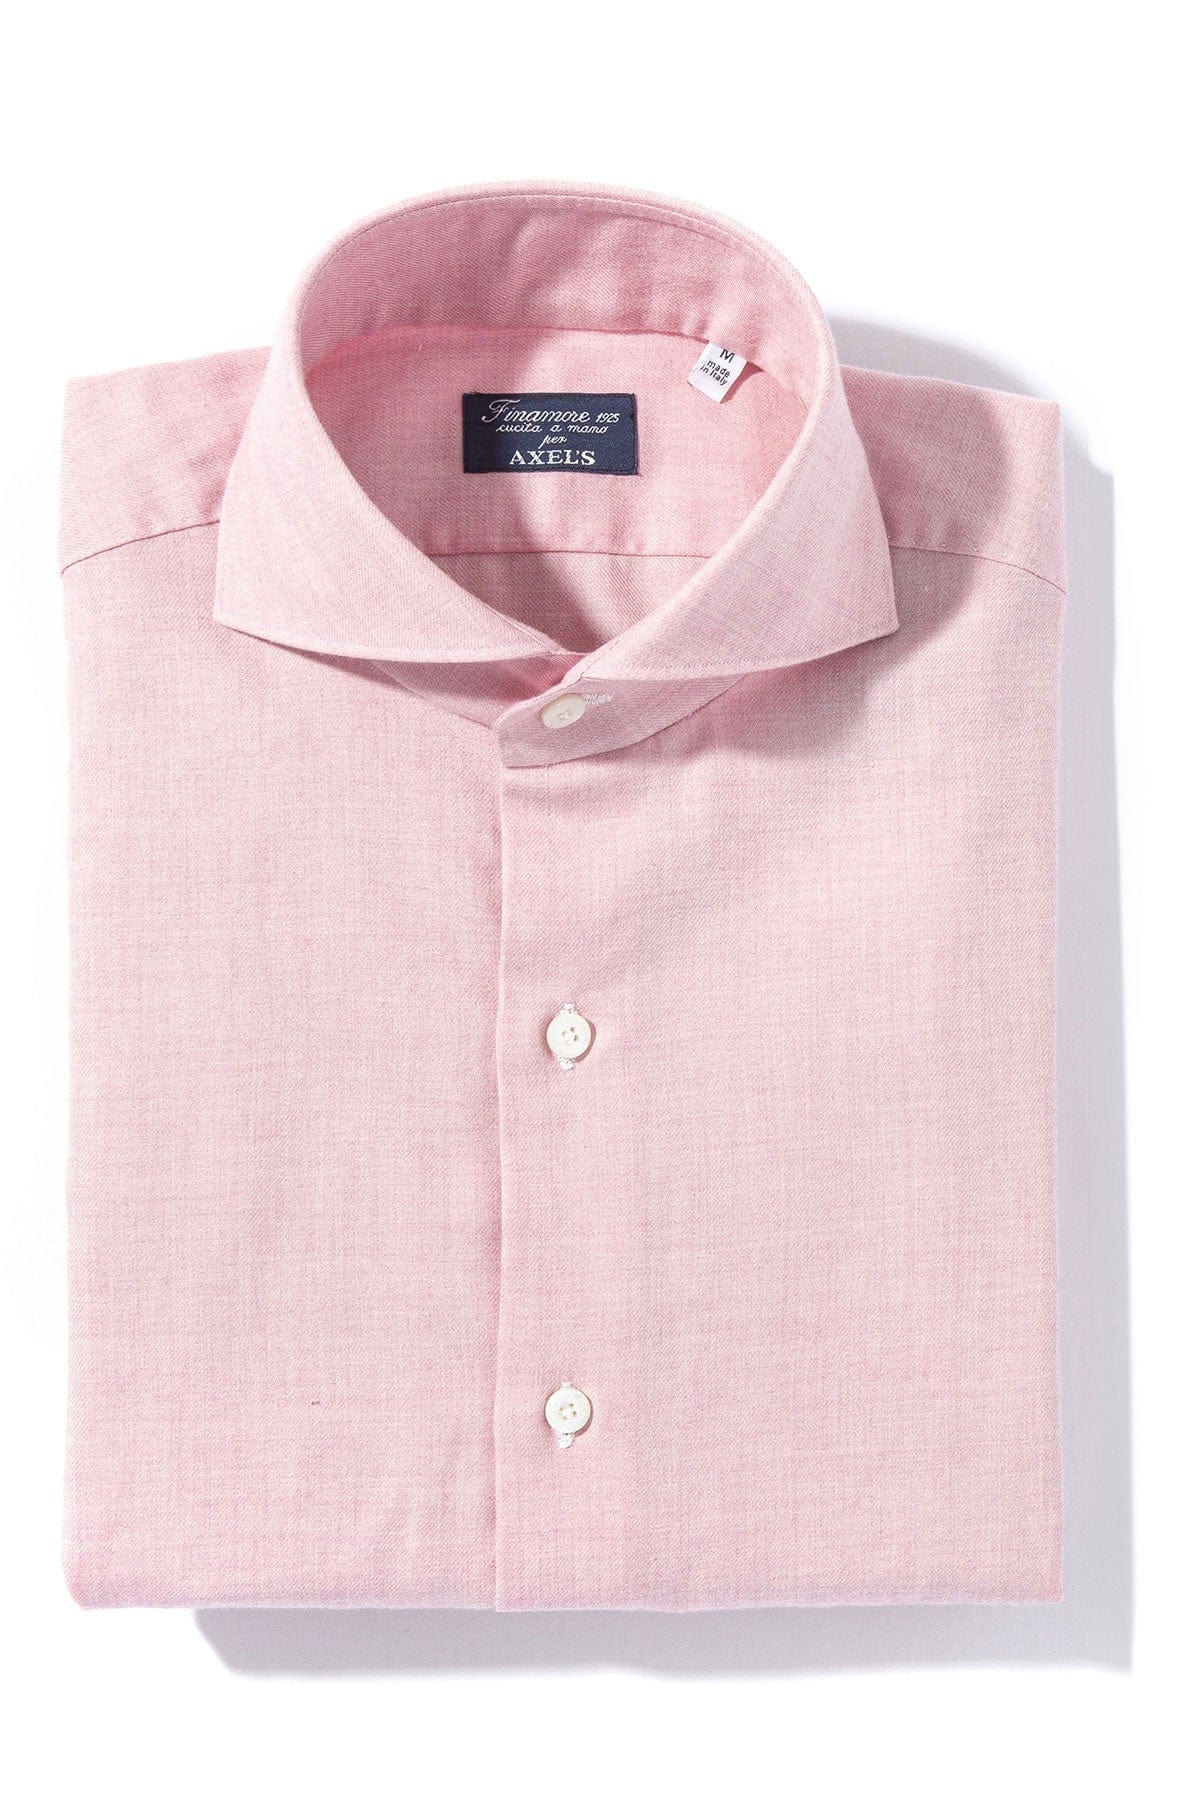 Hemme Cotton Shirt in Pink - AXEL'S